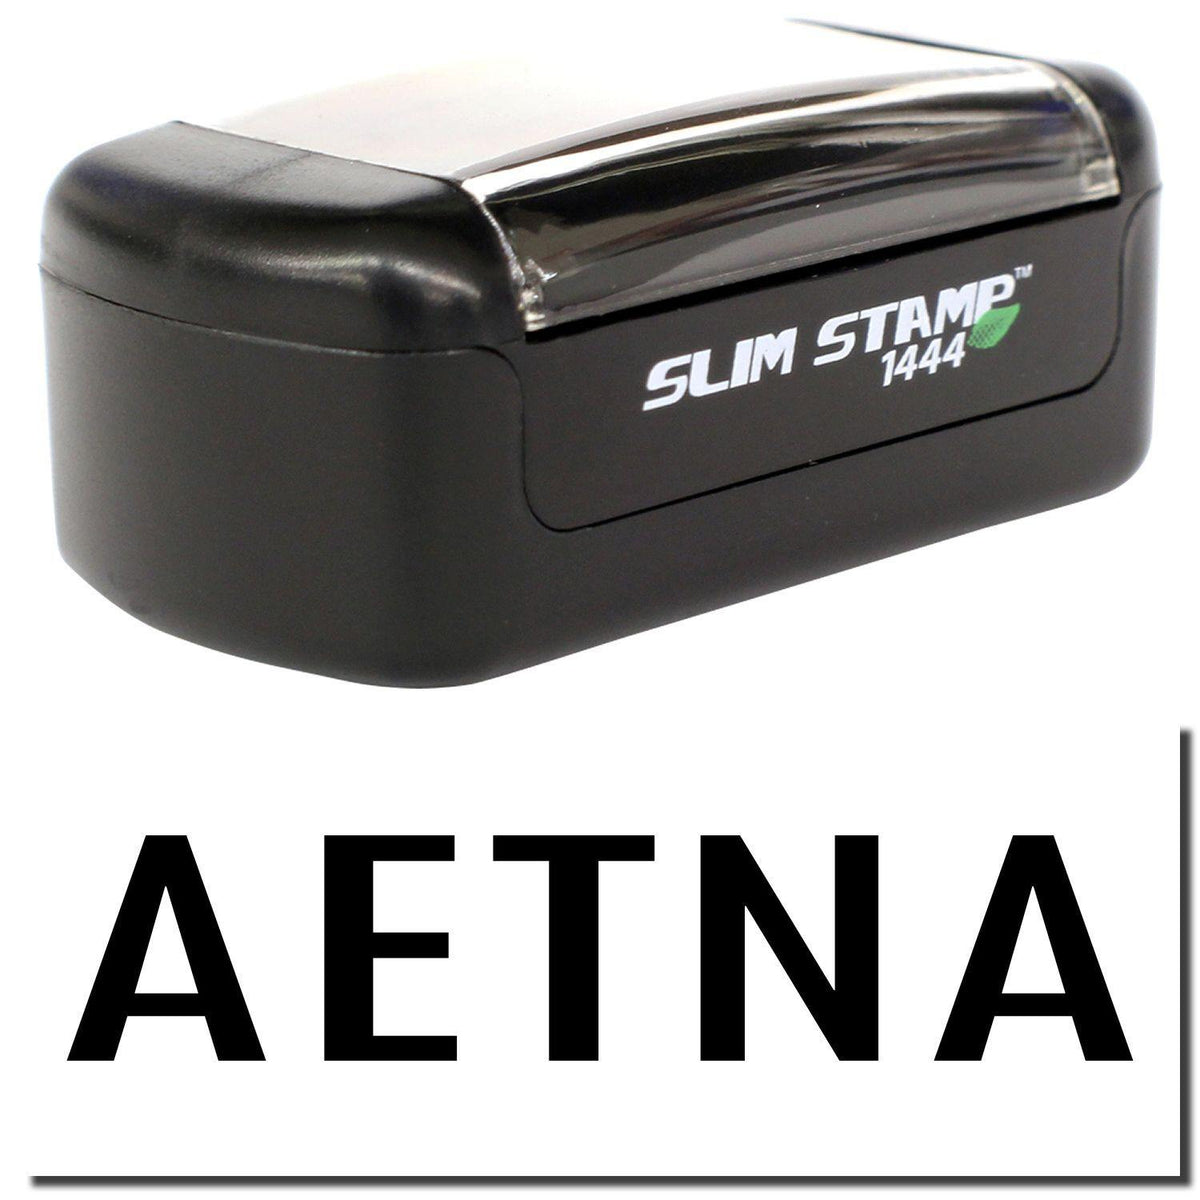 A stock office pre-inked stamp with a stamped image showing how the text &quot;AETNA&quot; is displayed after stamping.